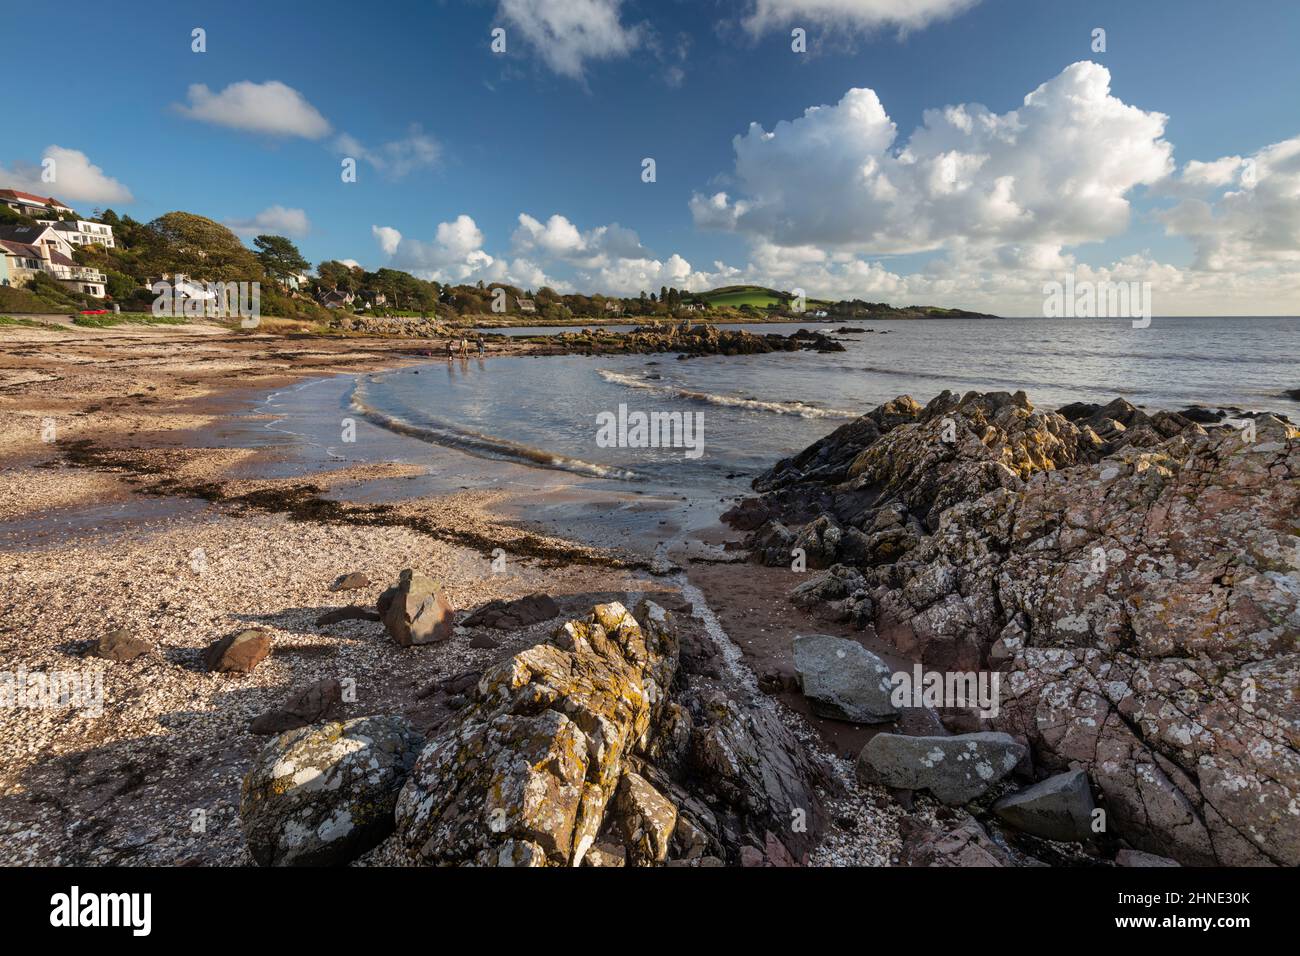 Beach and rocky coastline on the Solway Firth, Rockcliffe, Dalbeattie, Dumfries and Galloway, Scotland, United Kingdom, Europe Stock Photo